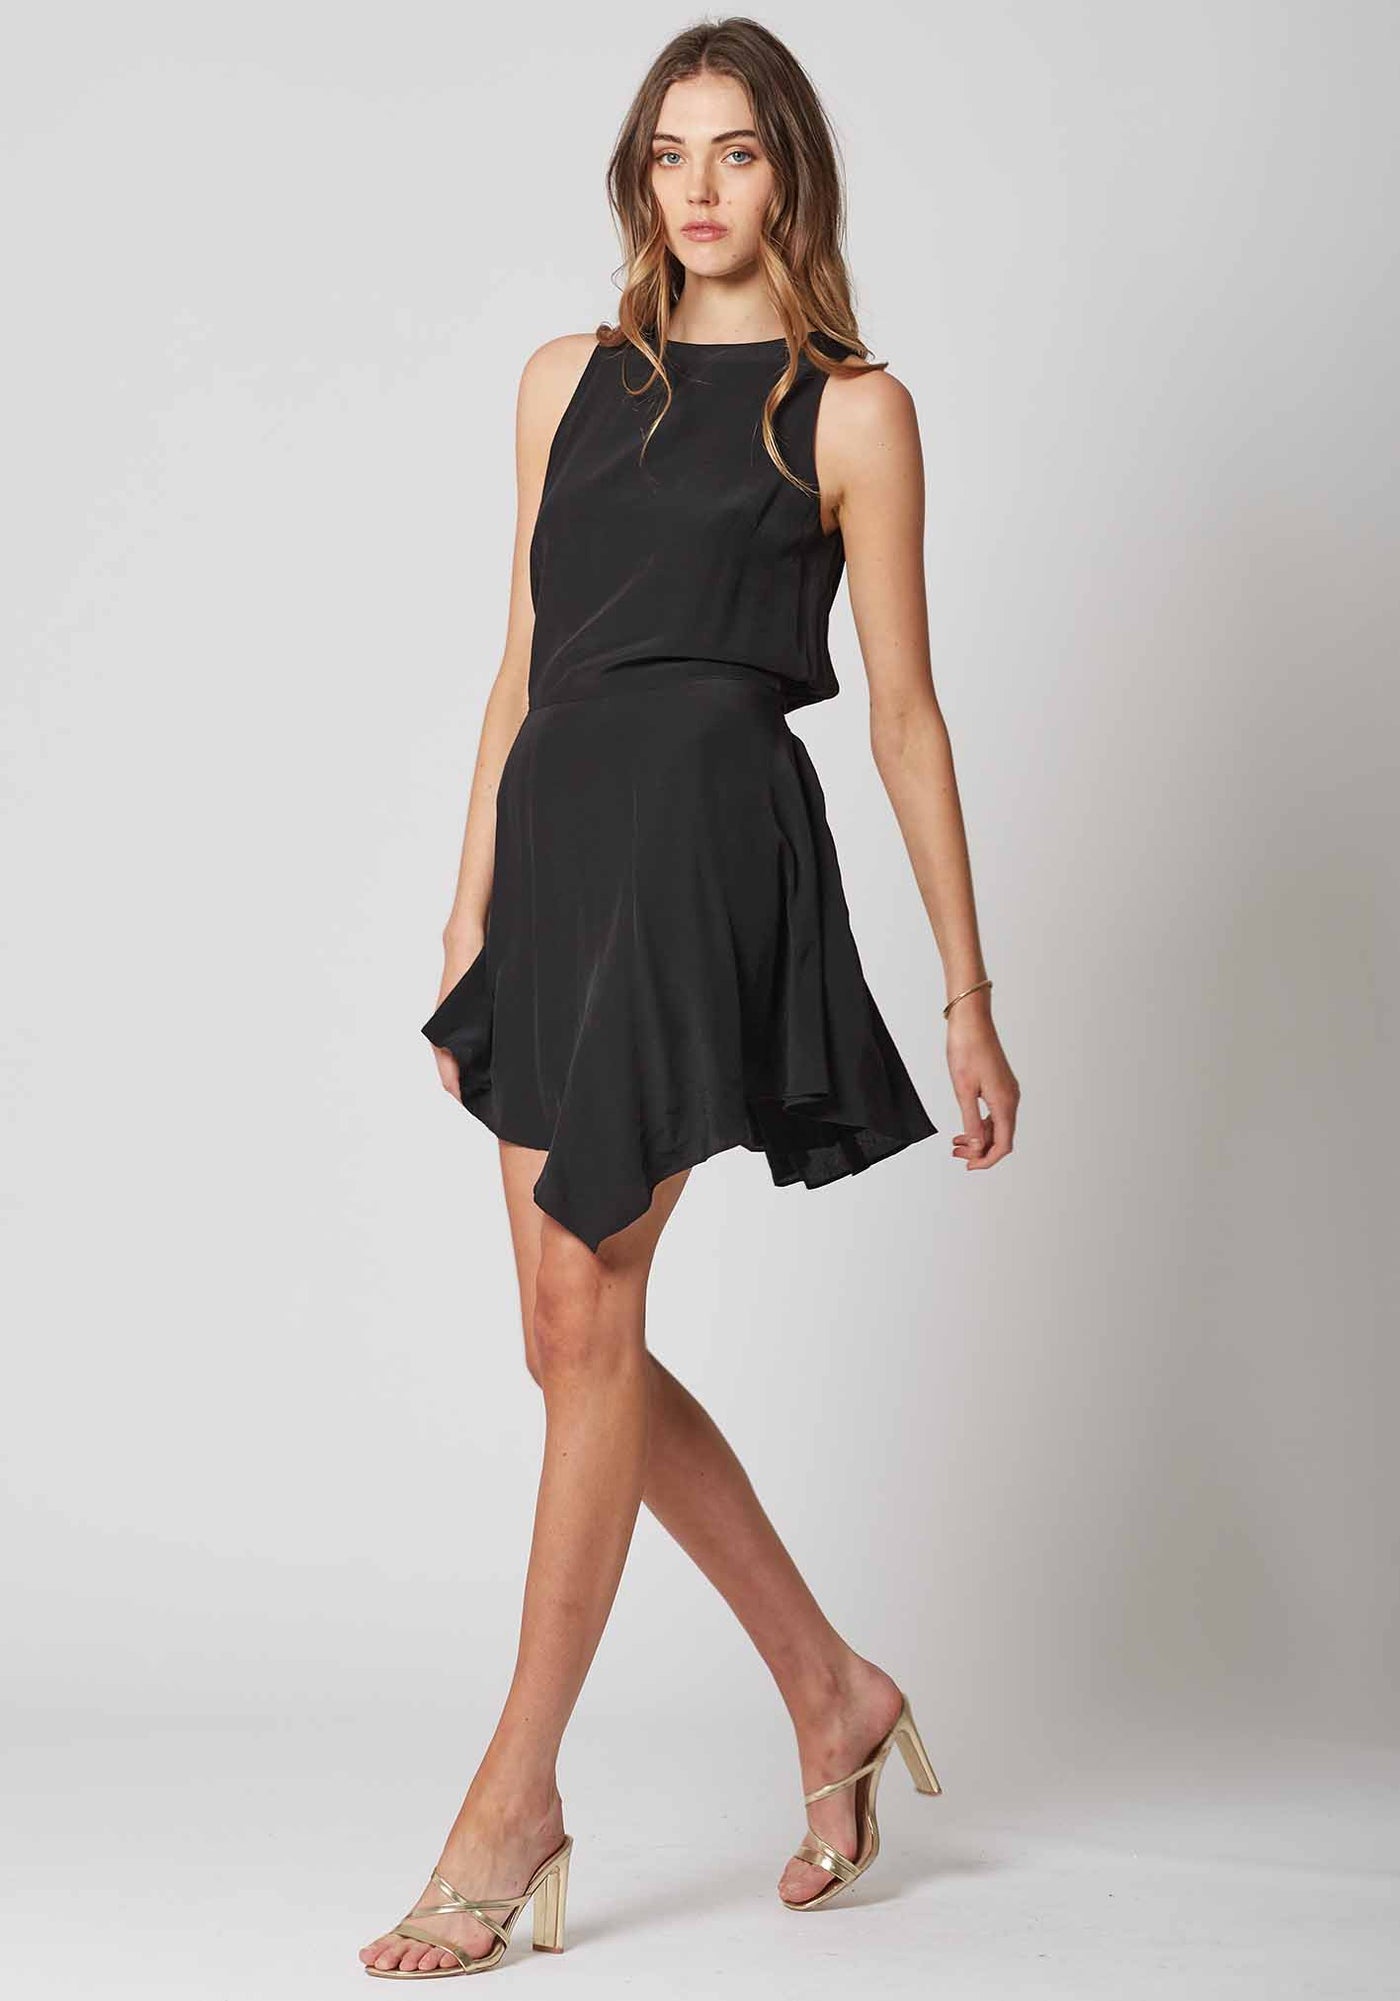 The Pocket Watch Party Dress Little Black Dress by Three of Something Australia